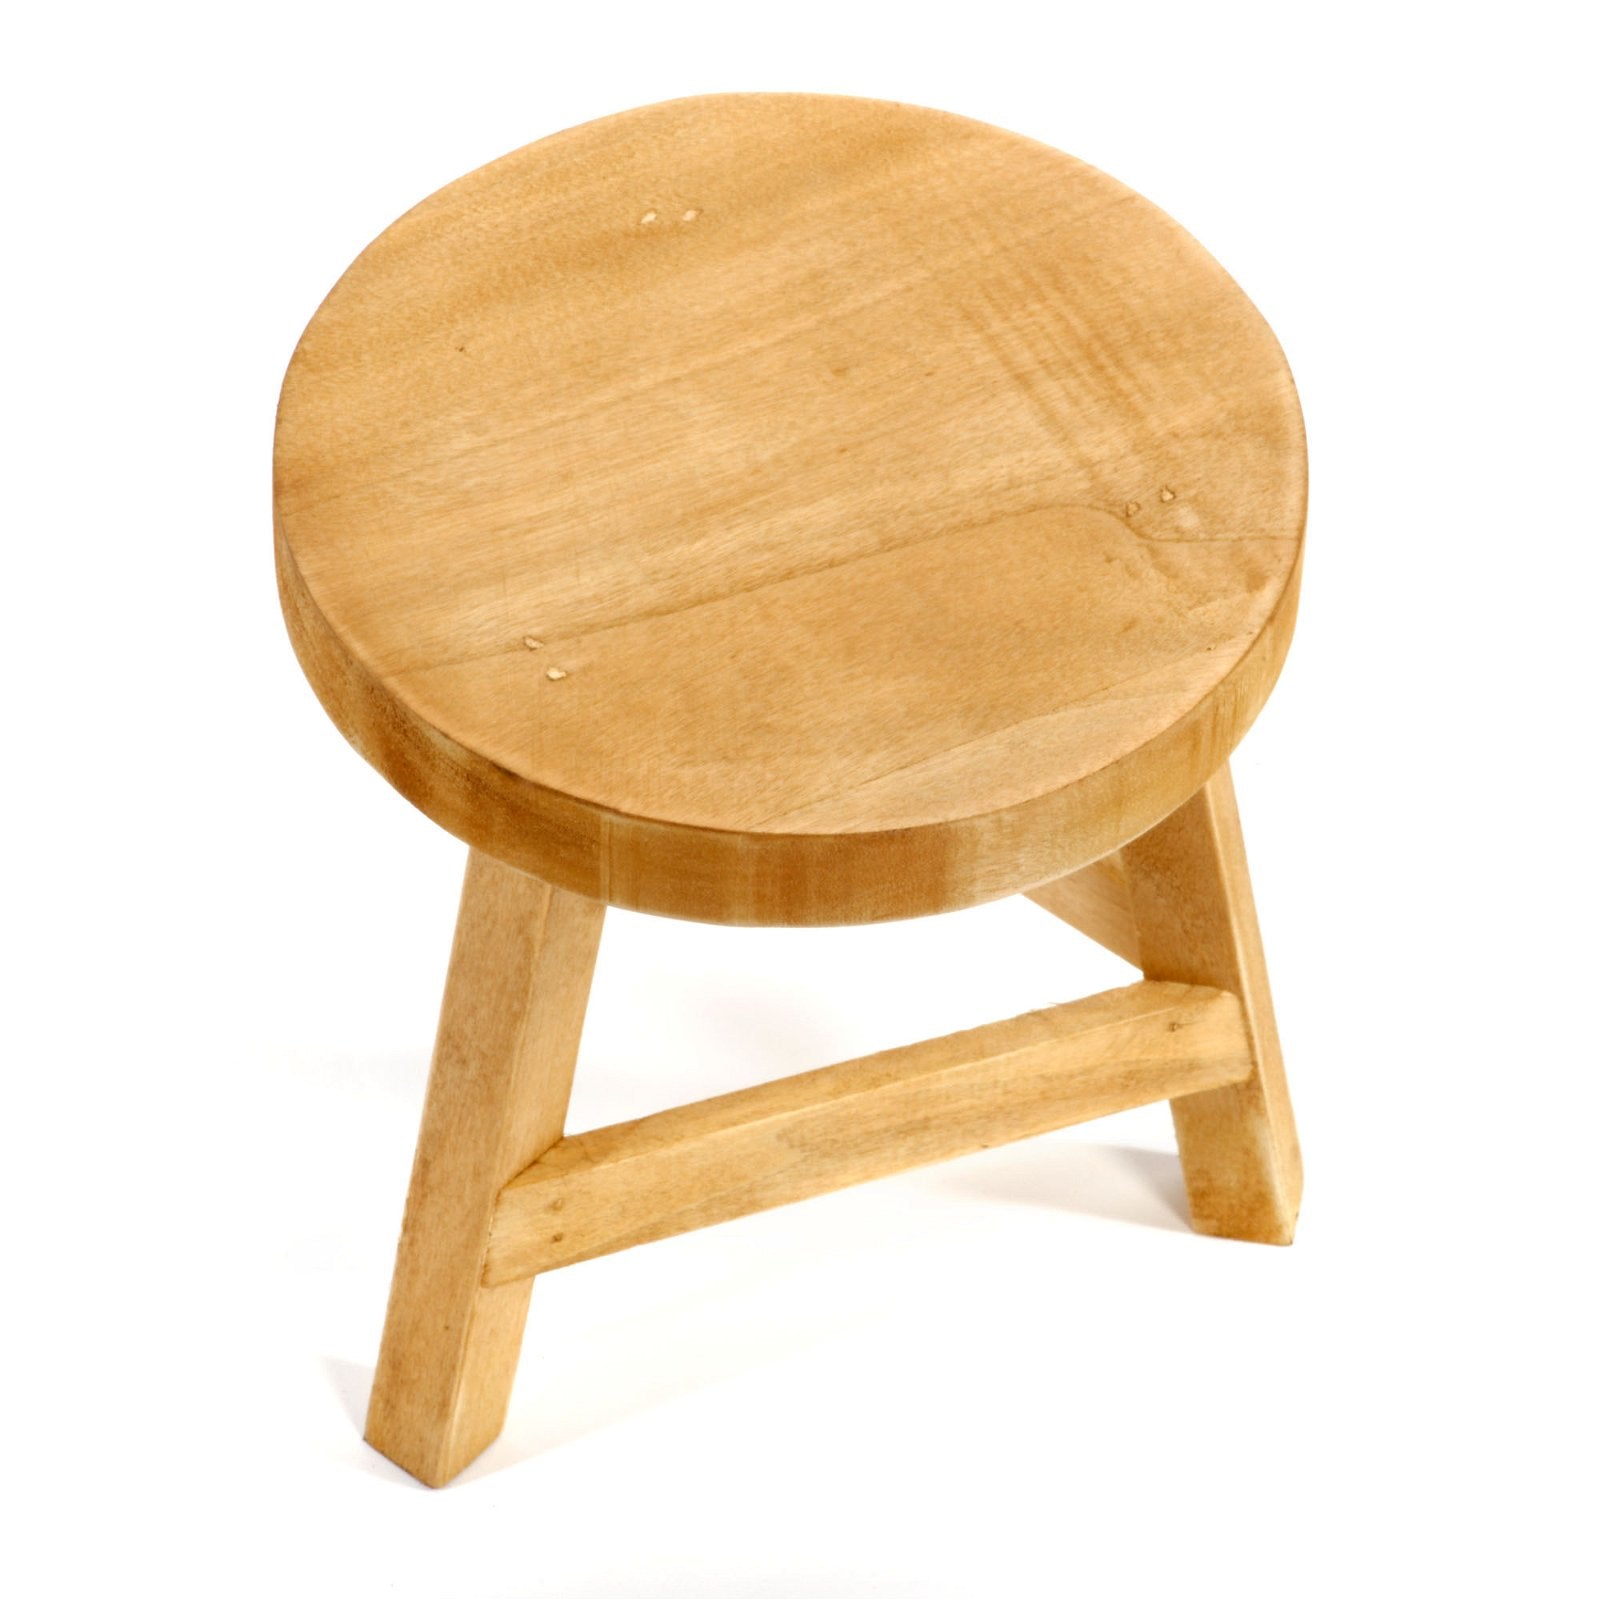 Plain Wood Three Legged Stool Standing at 23cm High Willow and Wine